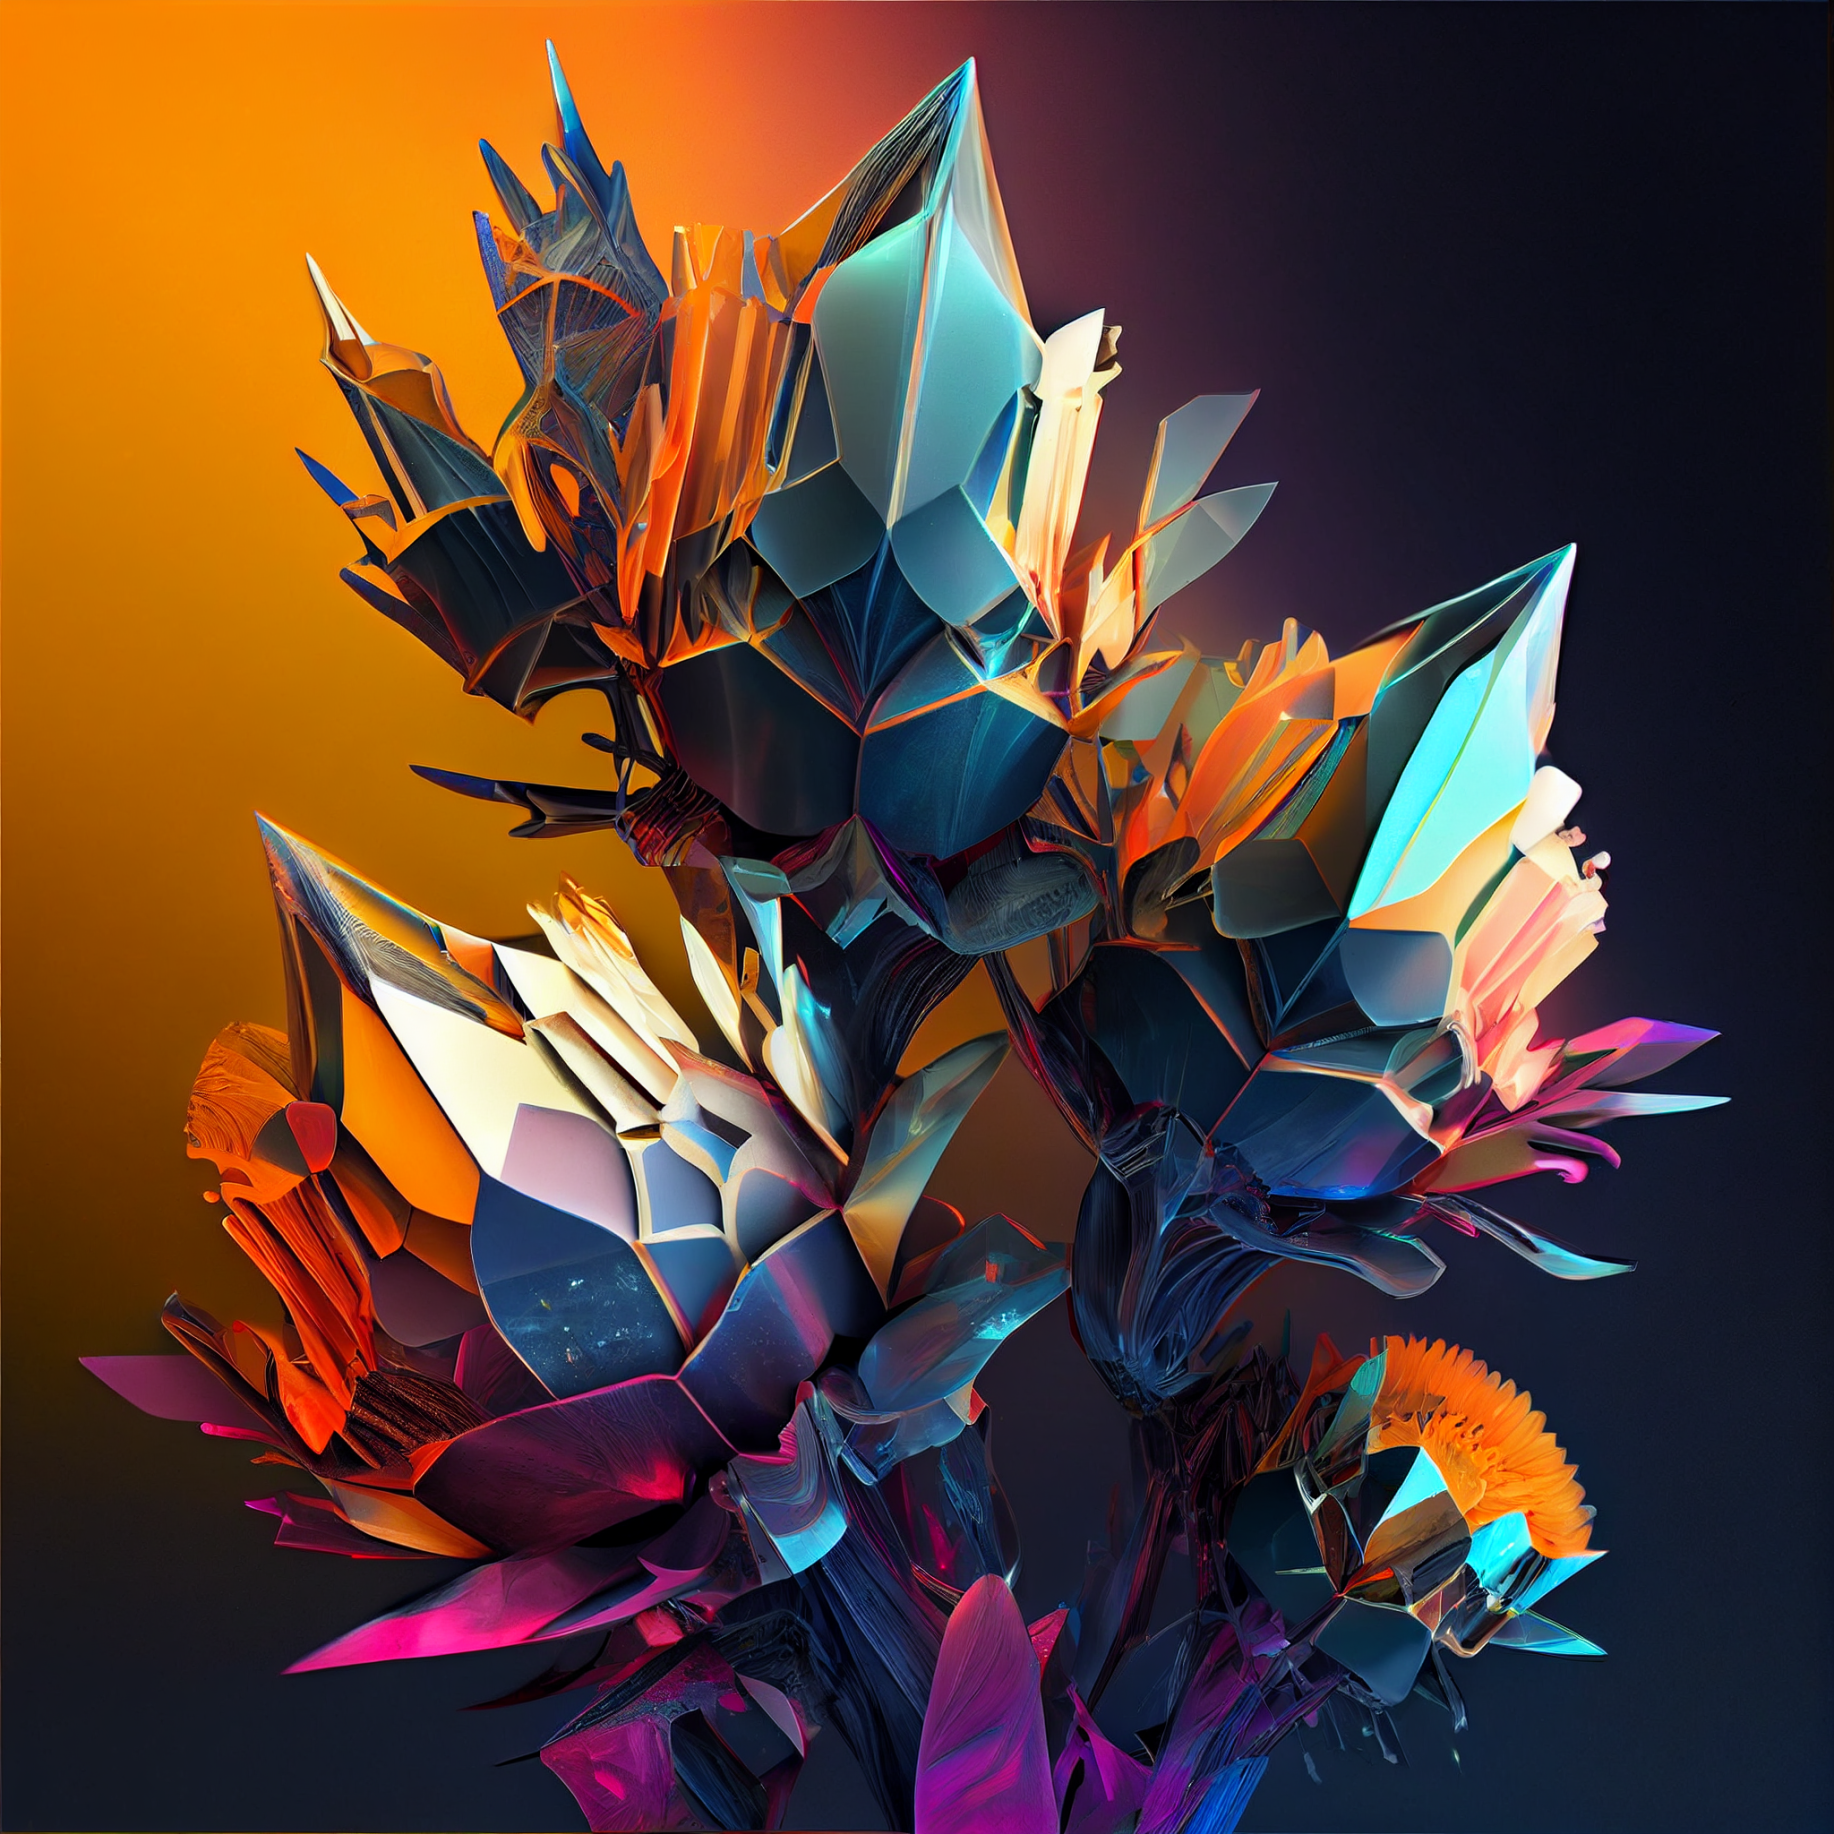 aaronalden_alien_flowers_made_of_crystal_enormous_scale_angular_8fbacc5b-1999-4de0-ac72-e694abf3310f.png